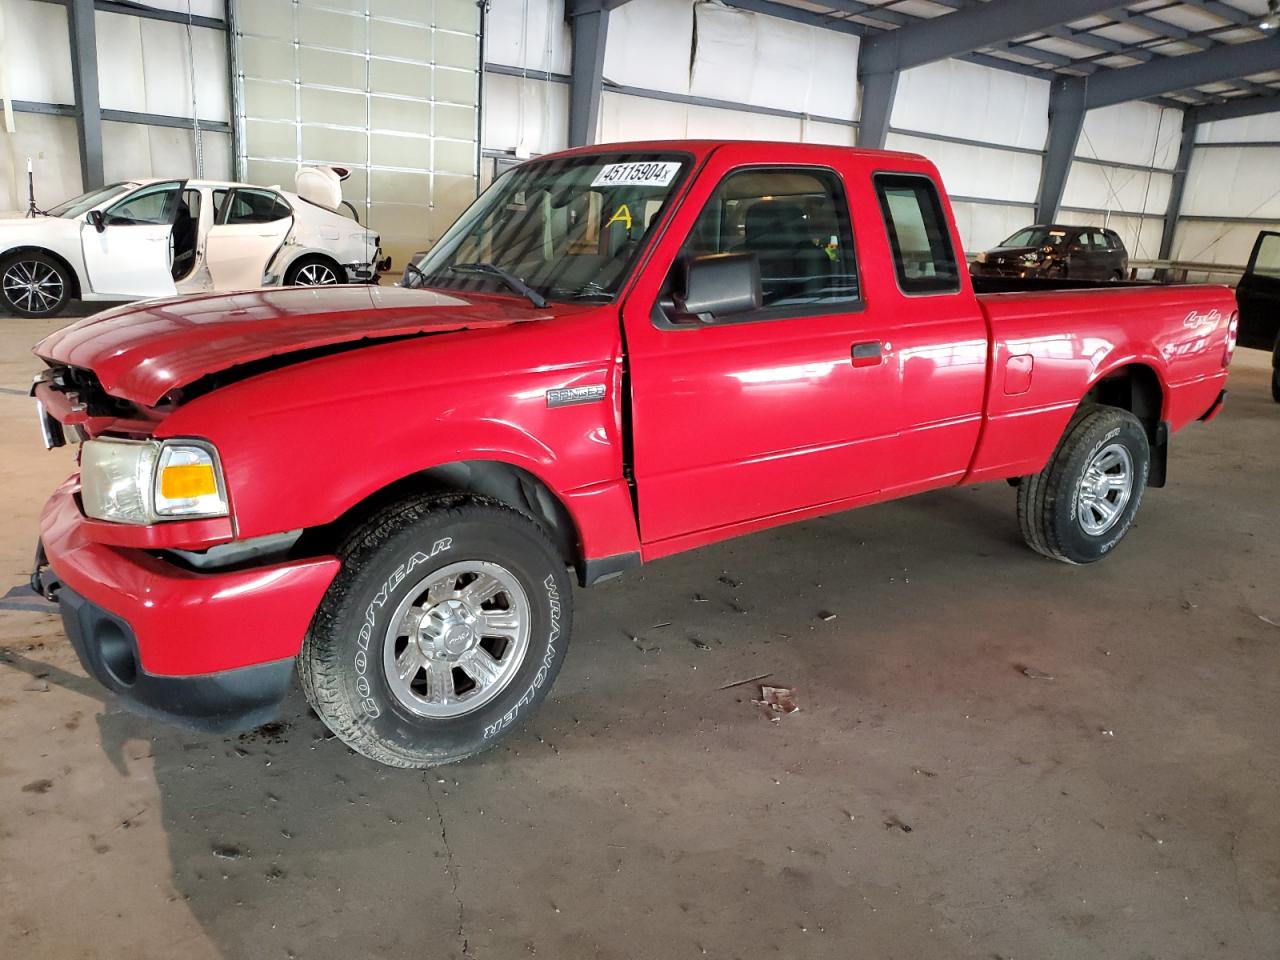 vin: 1FTZR15E89PA04096 1FTZR15E89PA04096 2009 ford ranger 4000 for Sale in 98338 9206, Wa - Graham, Graham, USA